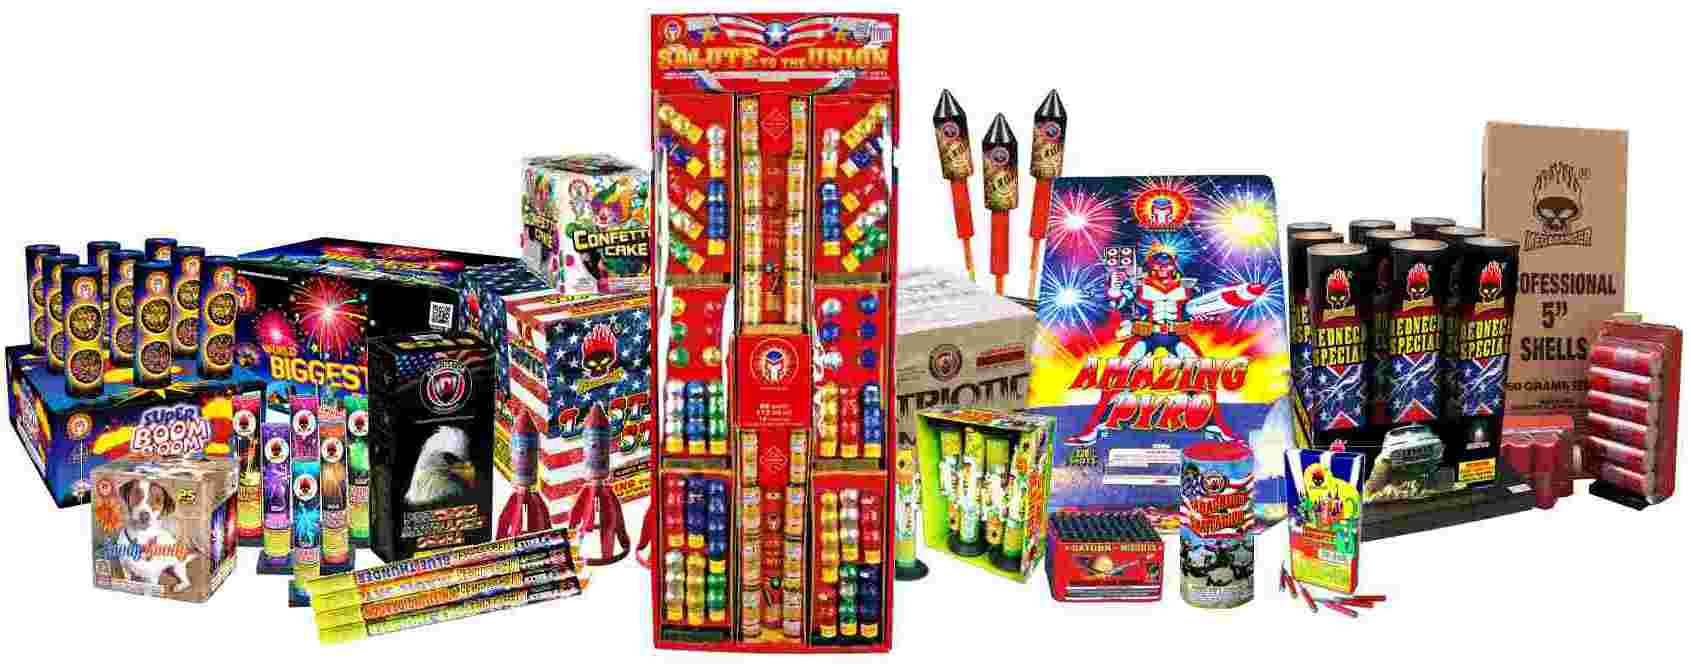 Welcome to CasabellasFireworks.com